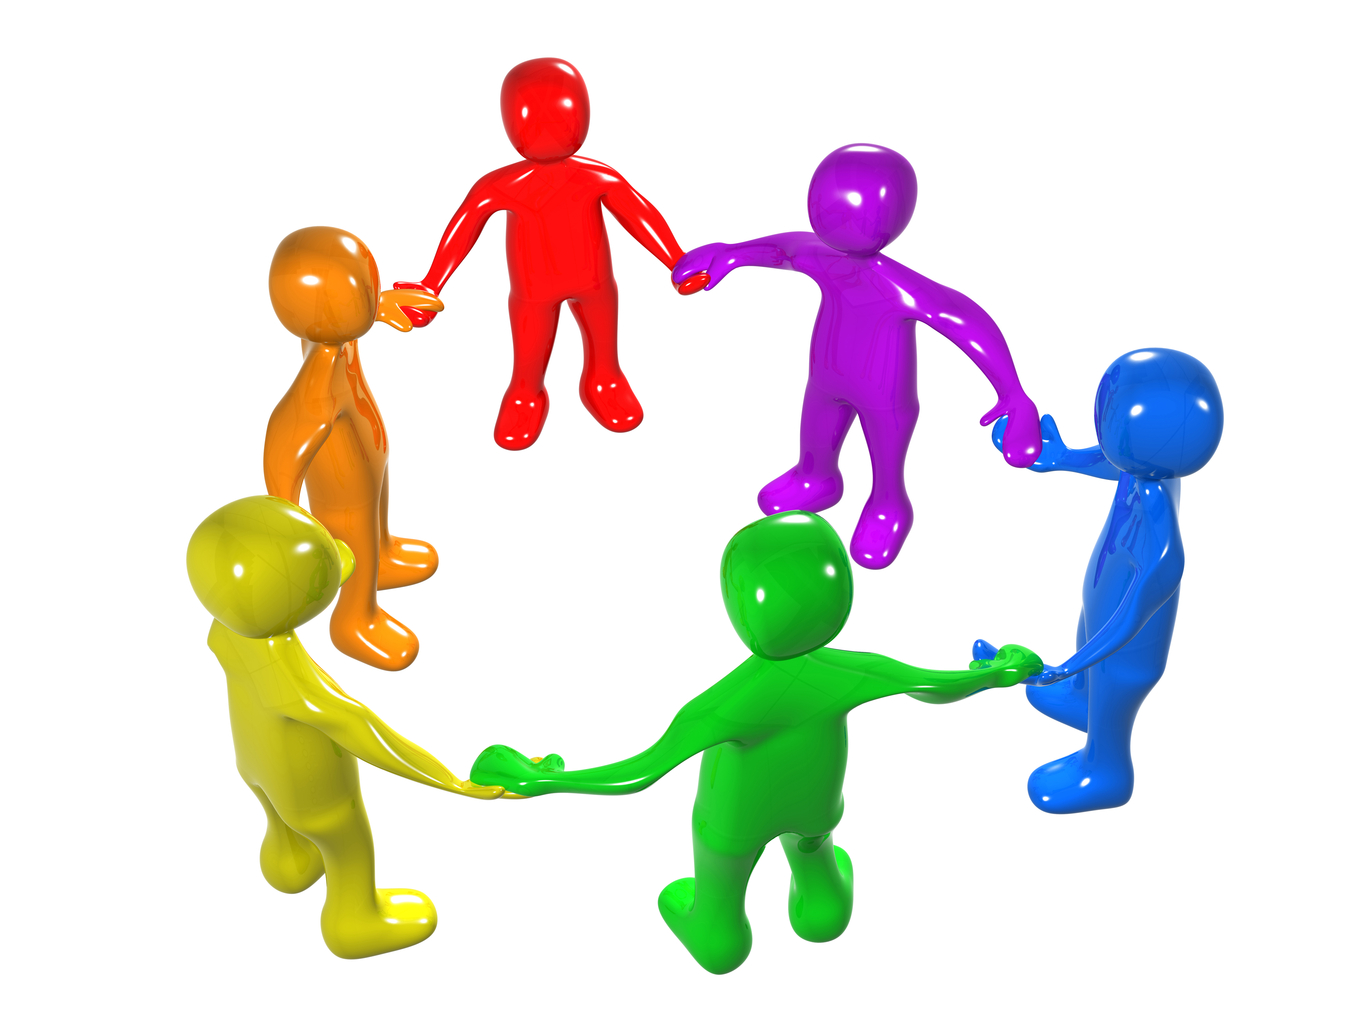 Working Together As A Team | Clipart Panda - Free Clipart Images